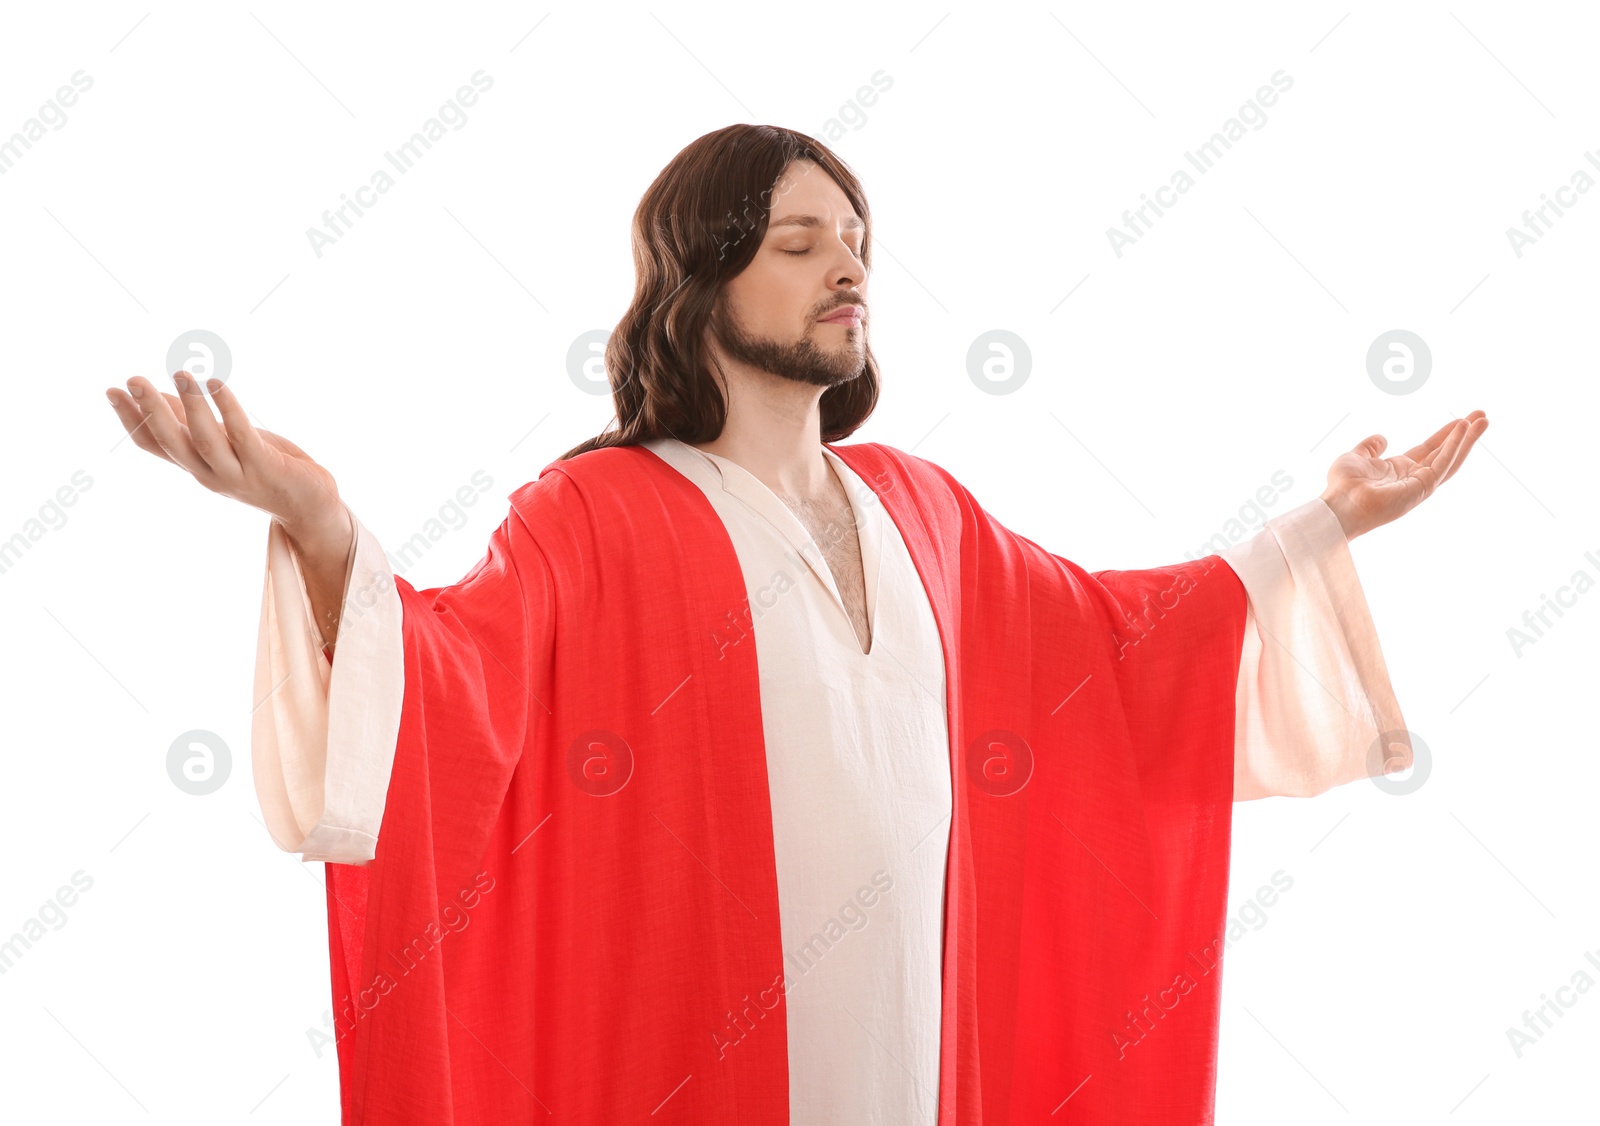 Photo of Jesus Christ with outstretched arms on white background